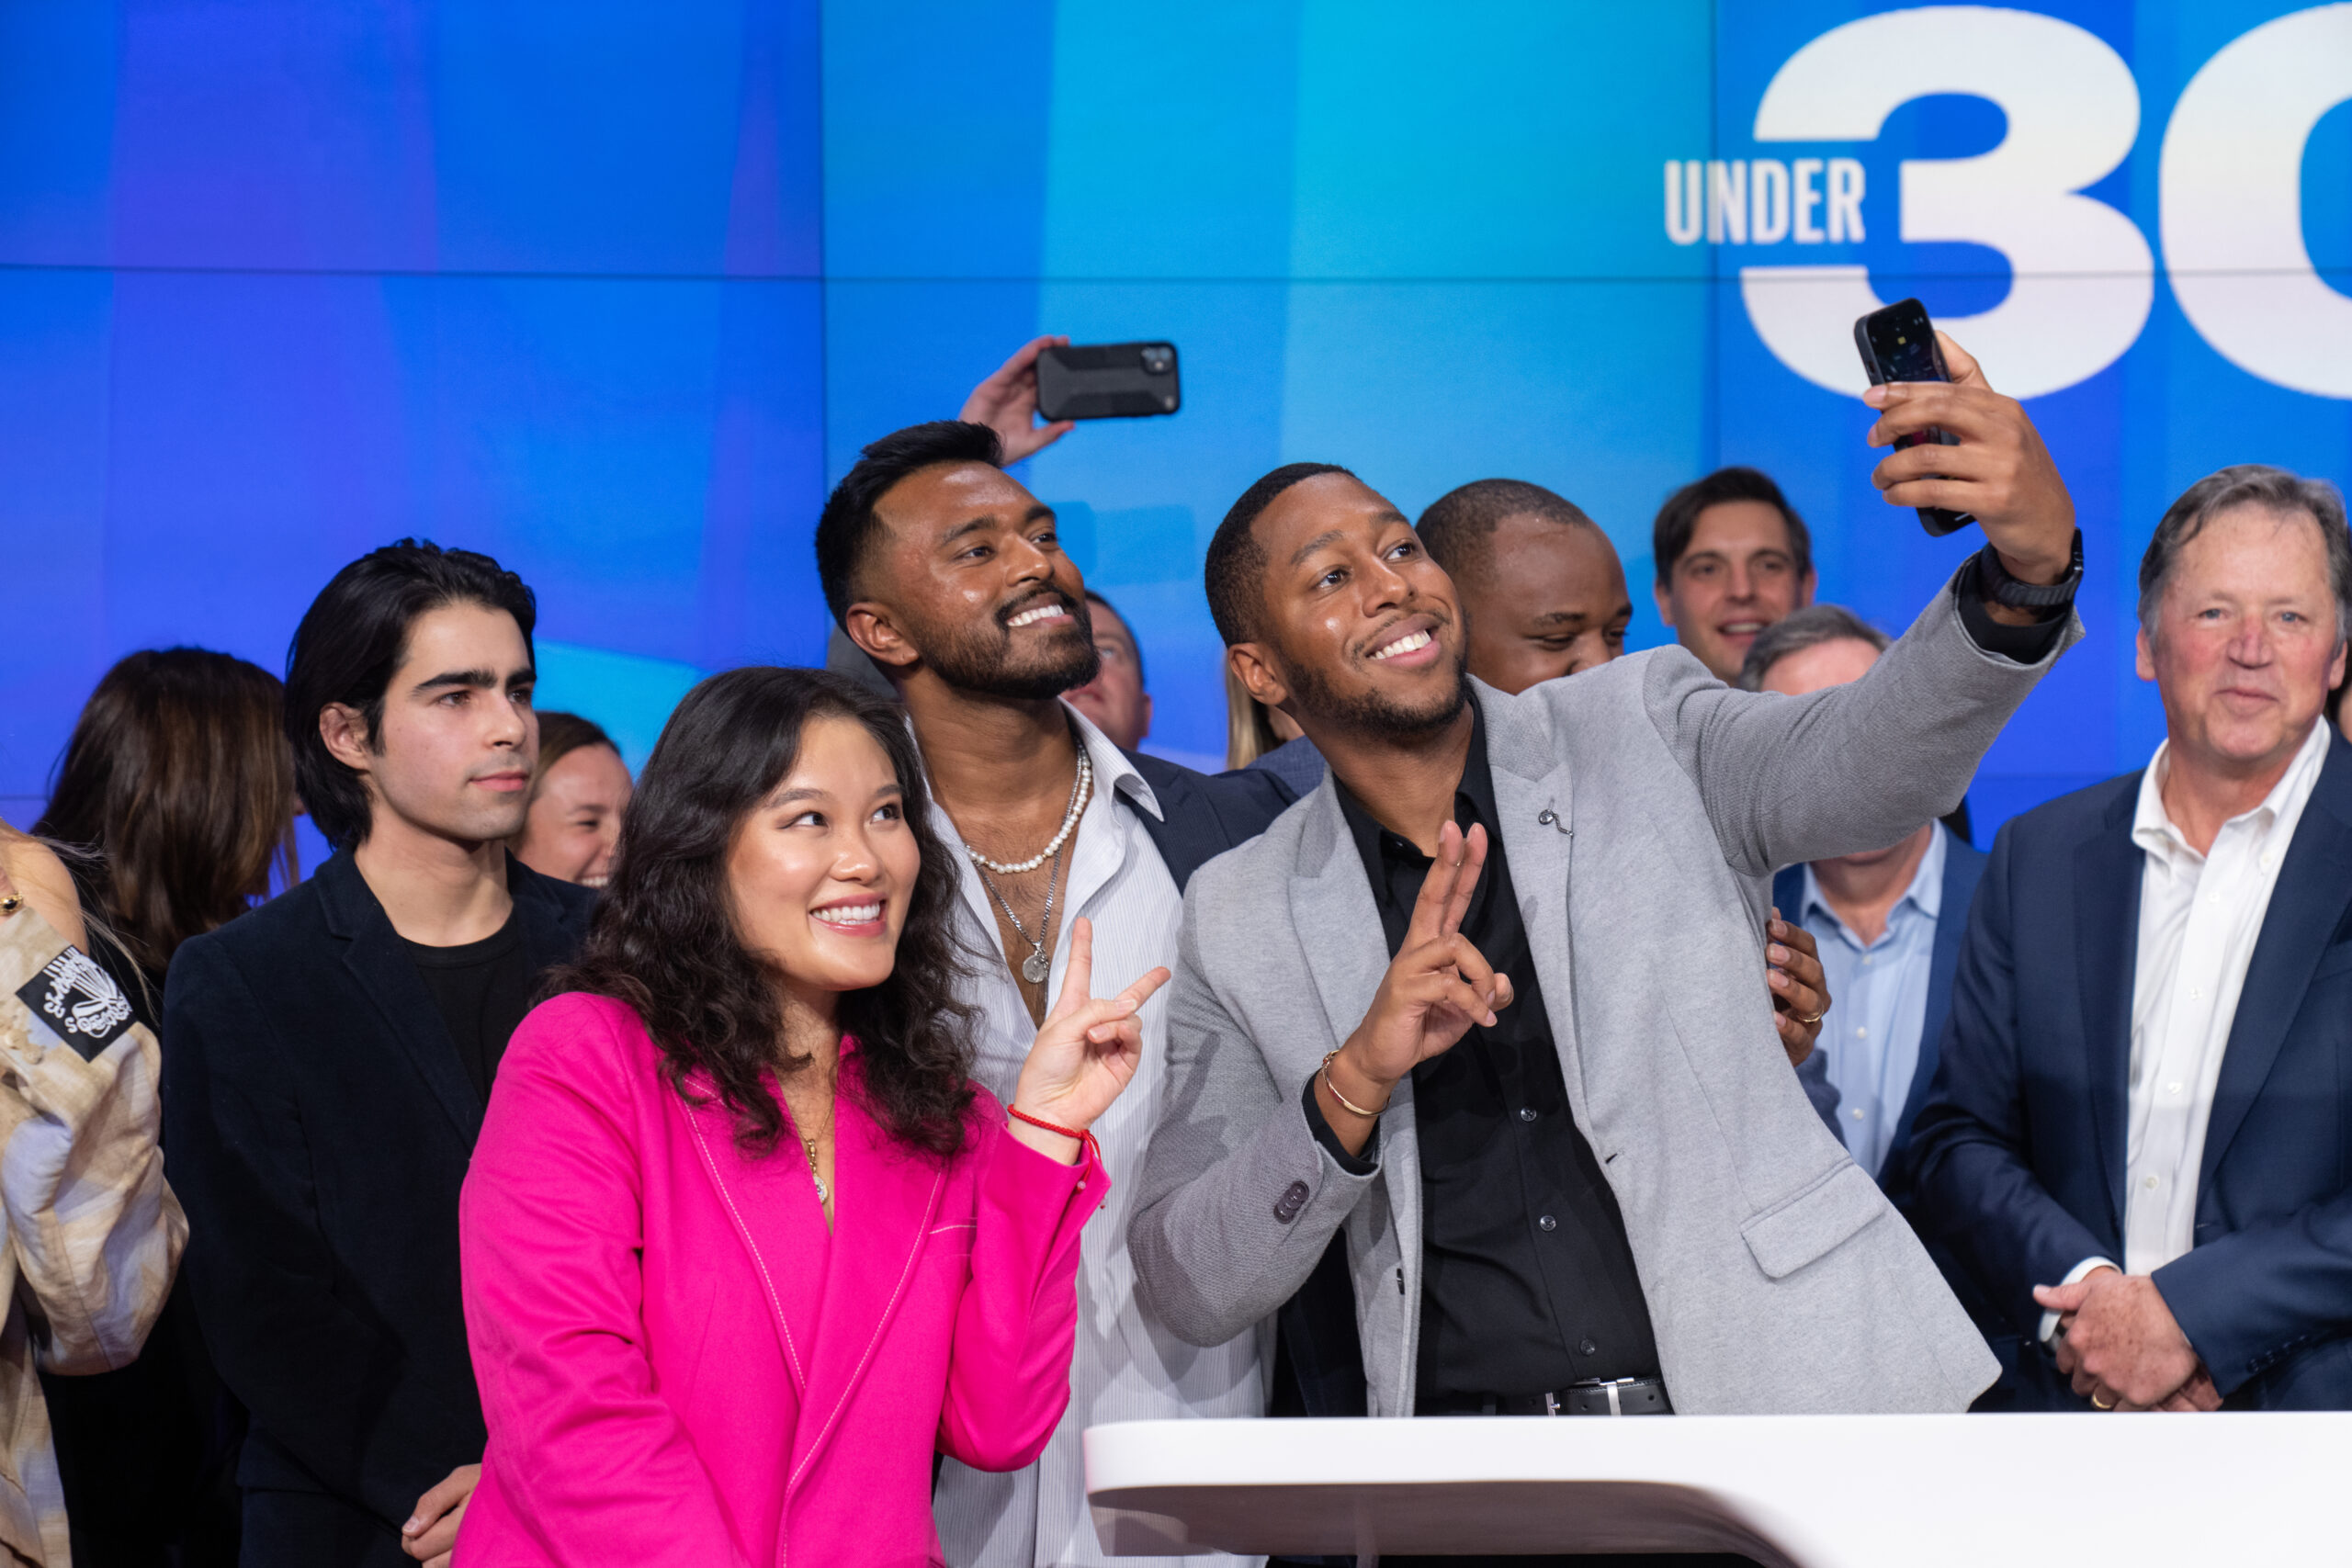 Derek Canton celebrates with fellow Forbes 30 Under 30 honorees in December by ringing the Nasdaq closing bell in Times Square